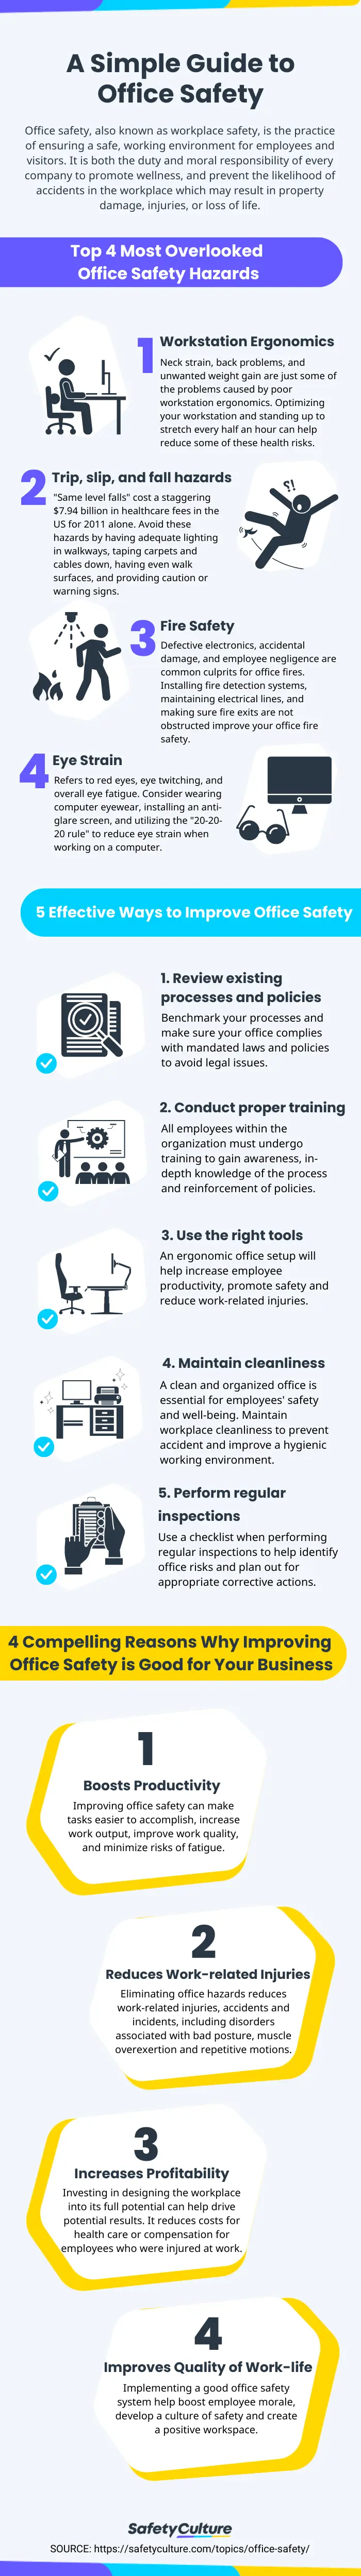 office safety infographic